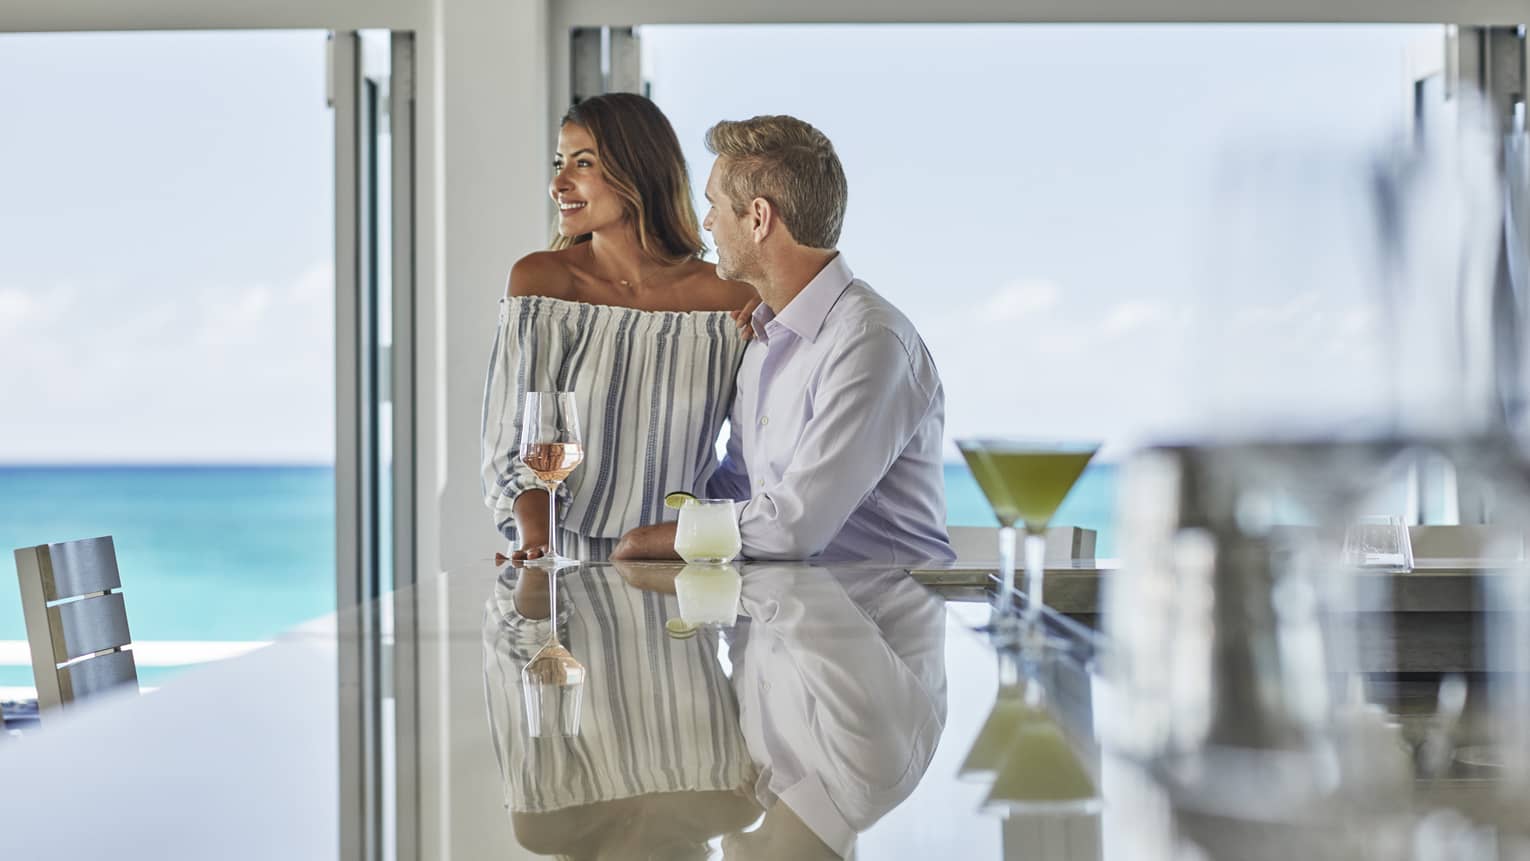 Couple with cocktails at end of shining bar by bright windows overlooking ocean